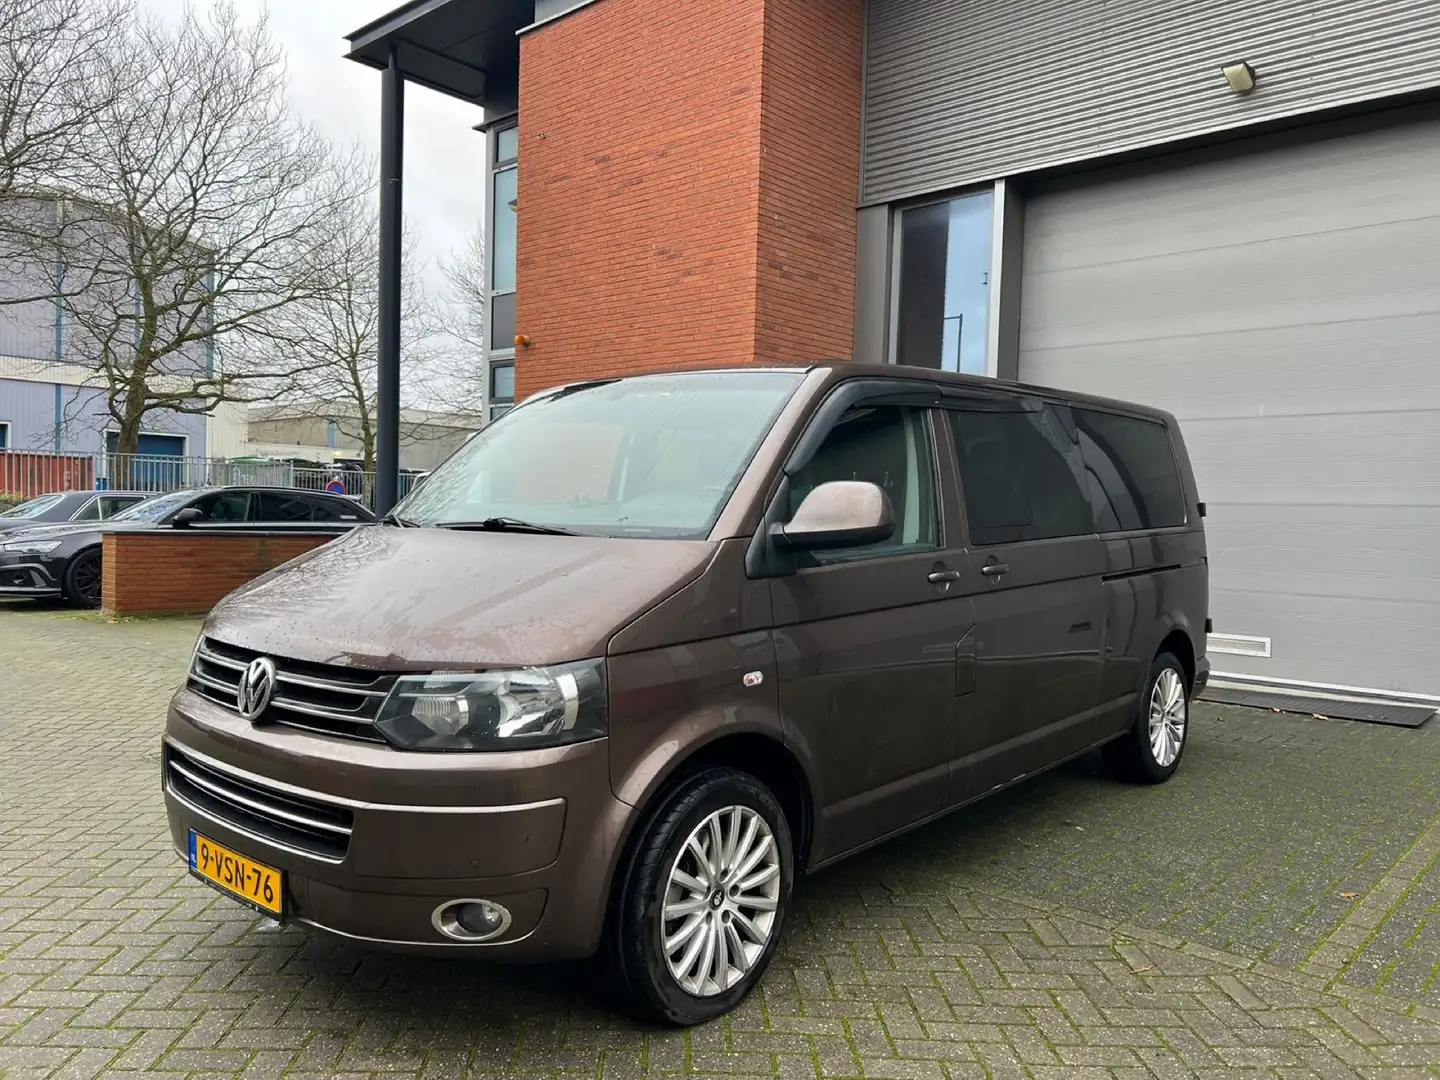 Volkswagen T5 Transporter volkswagen transporter limited edition Brun - 1